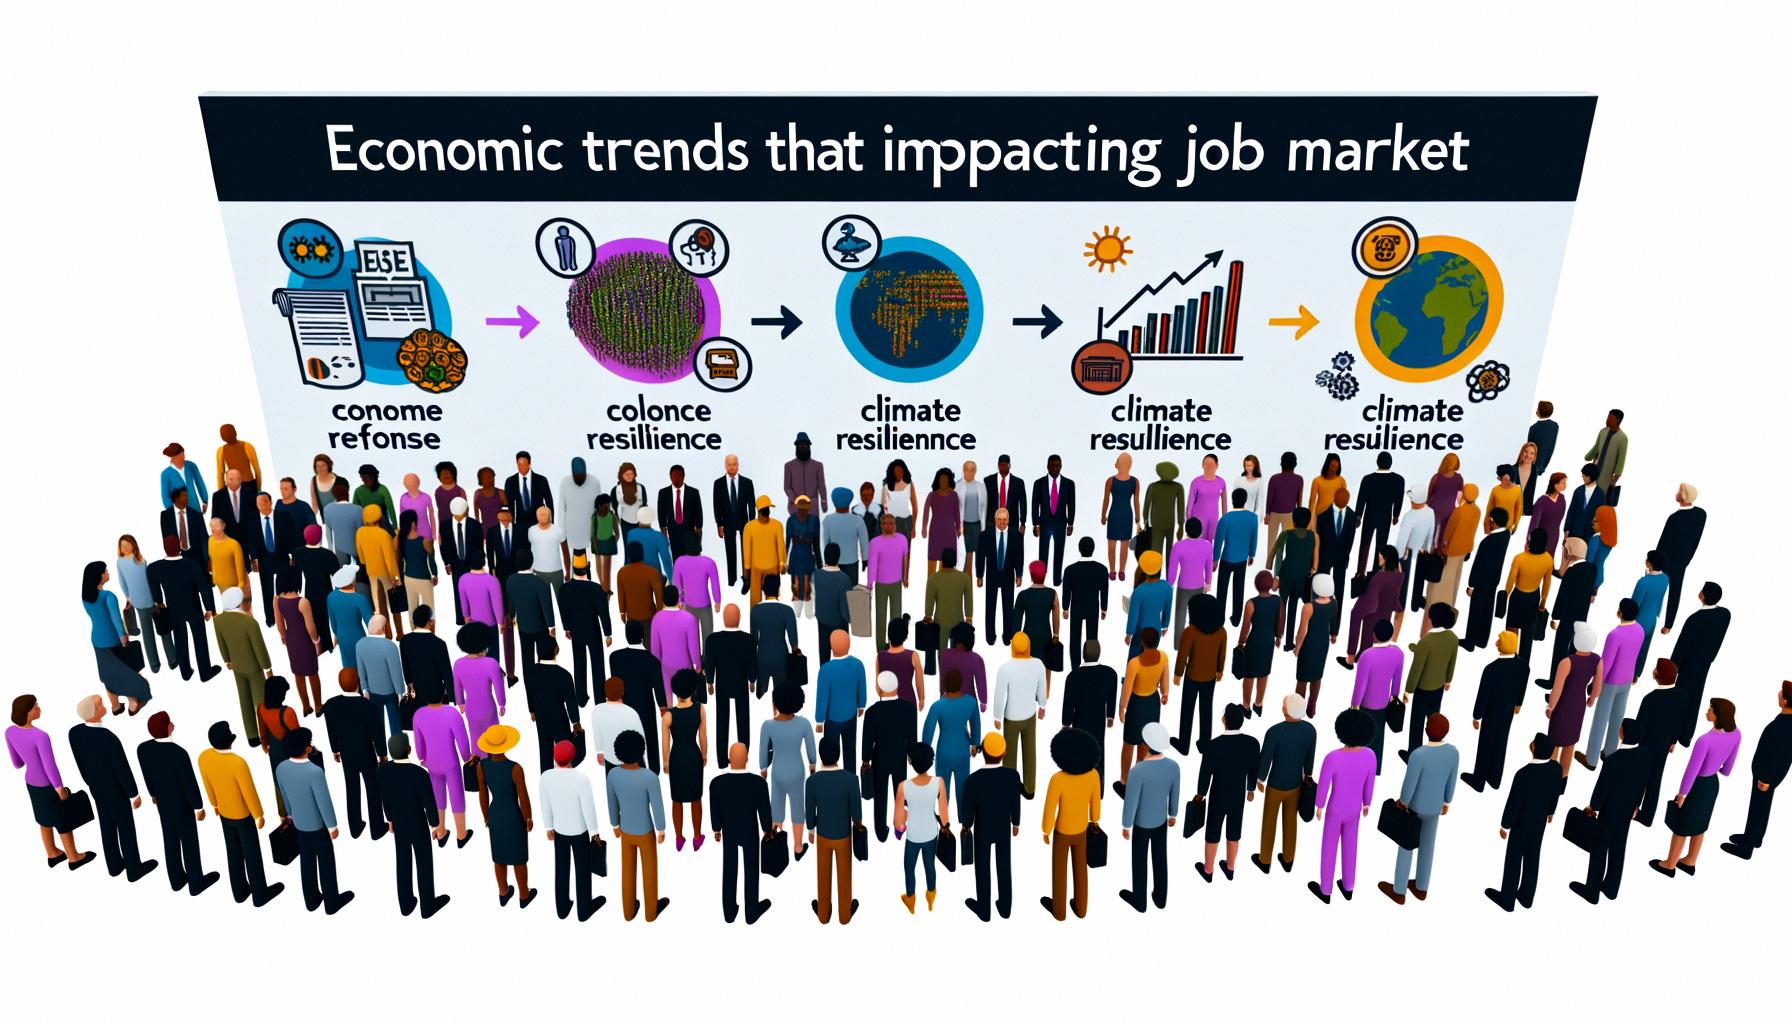 Economic trends affecting job markets, climate resilience, and public sentiment Balanced News